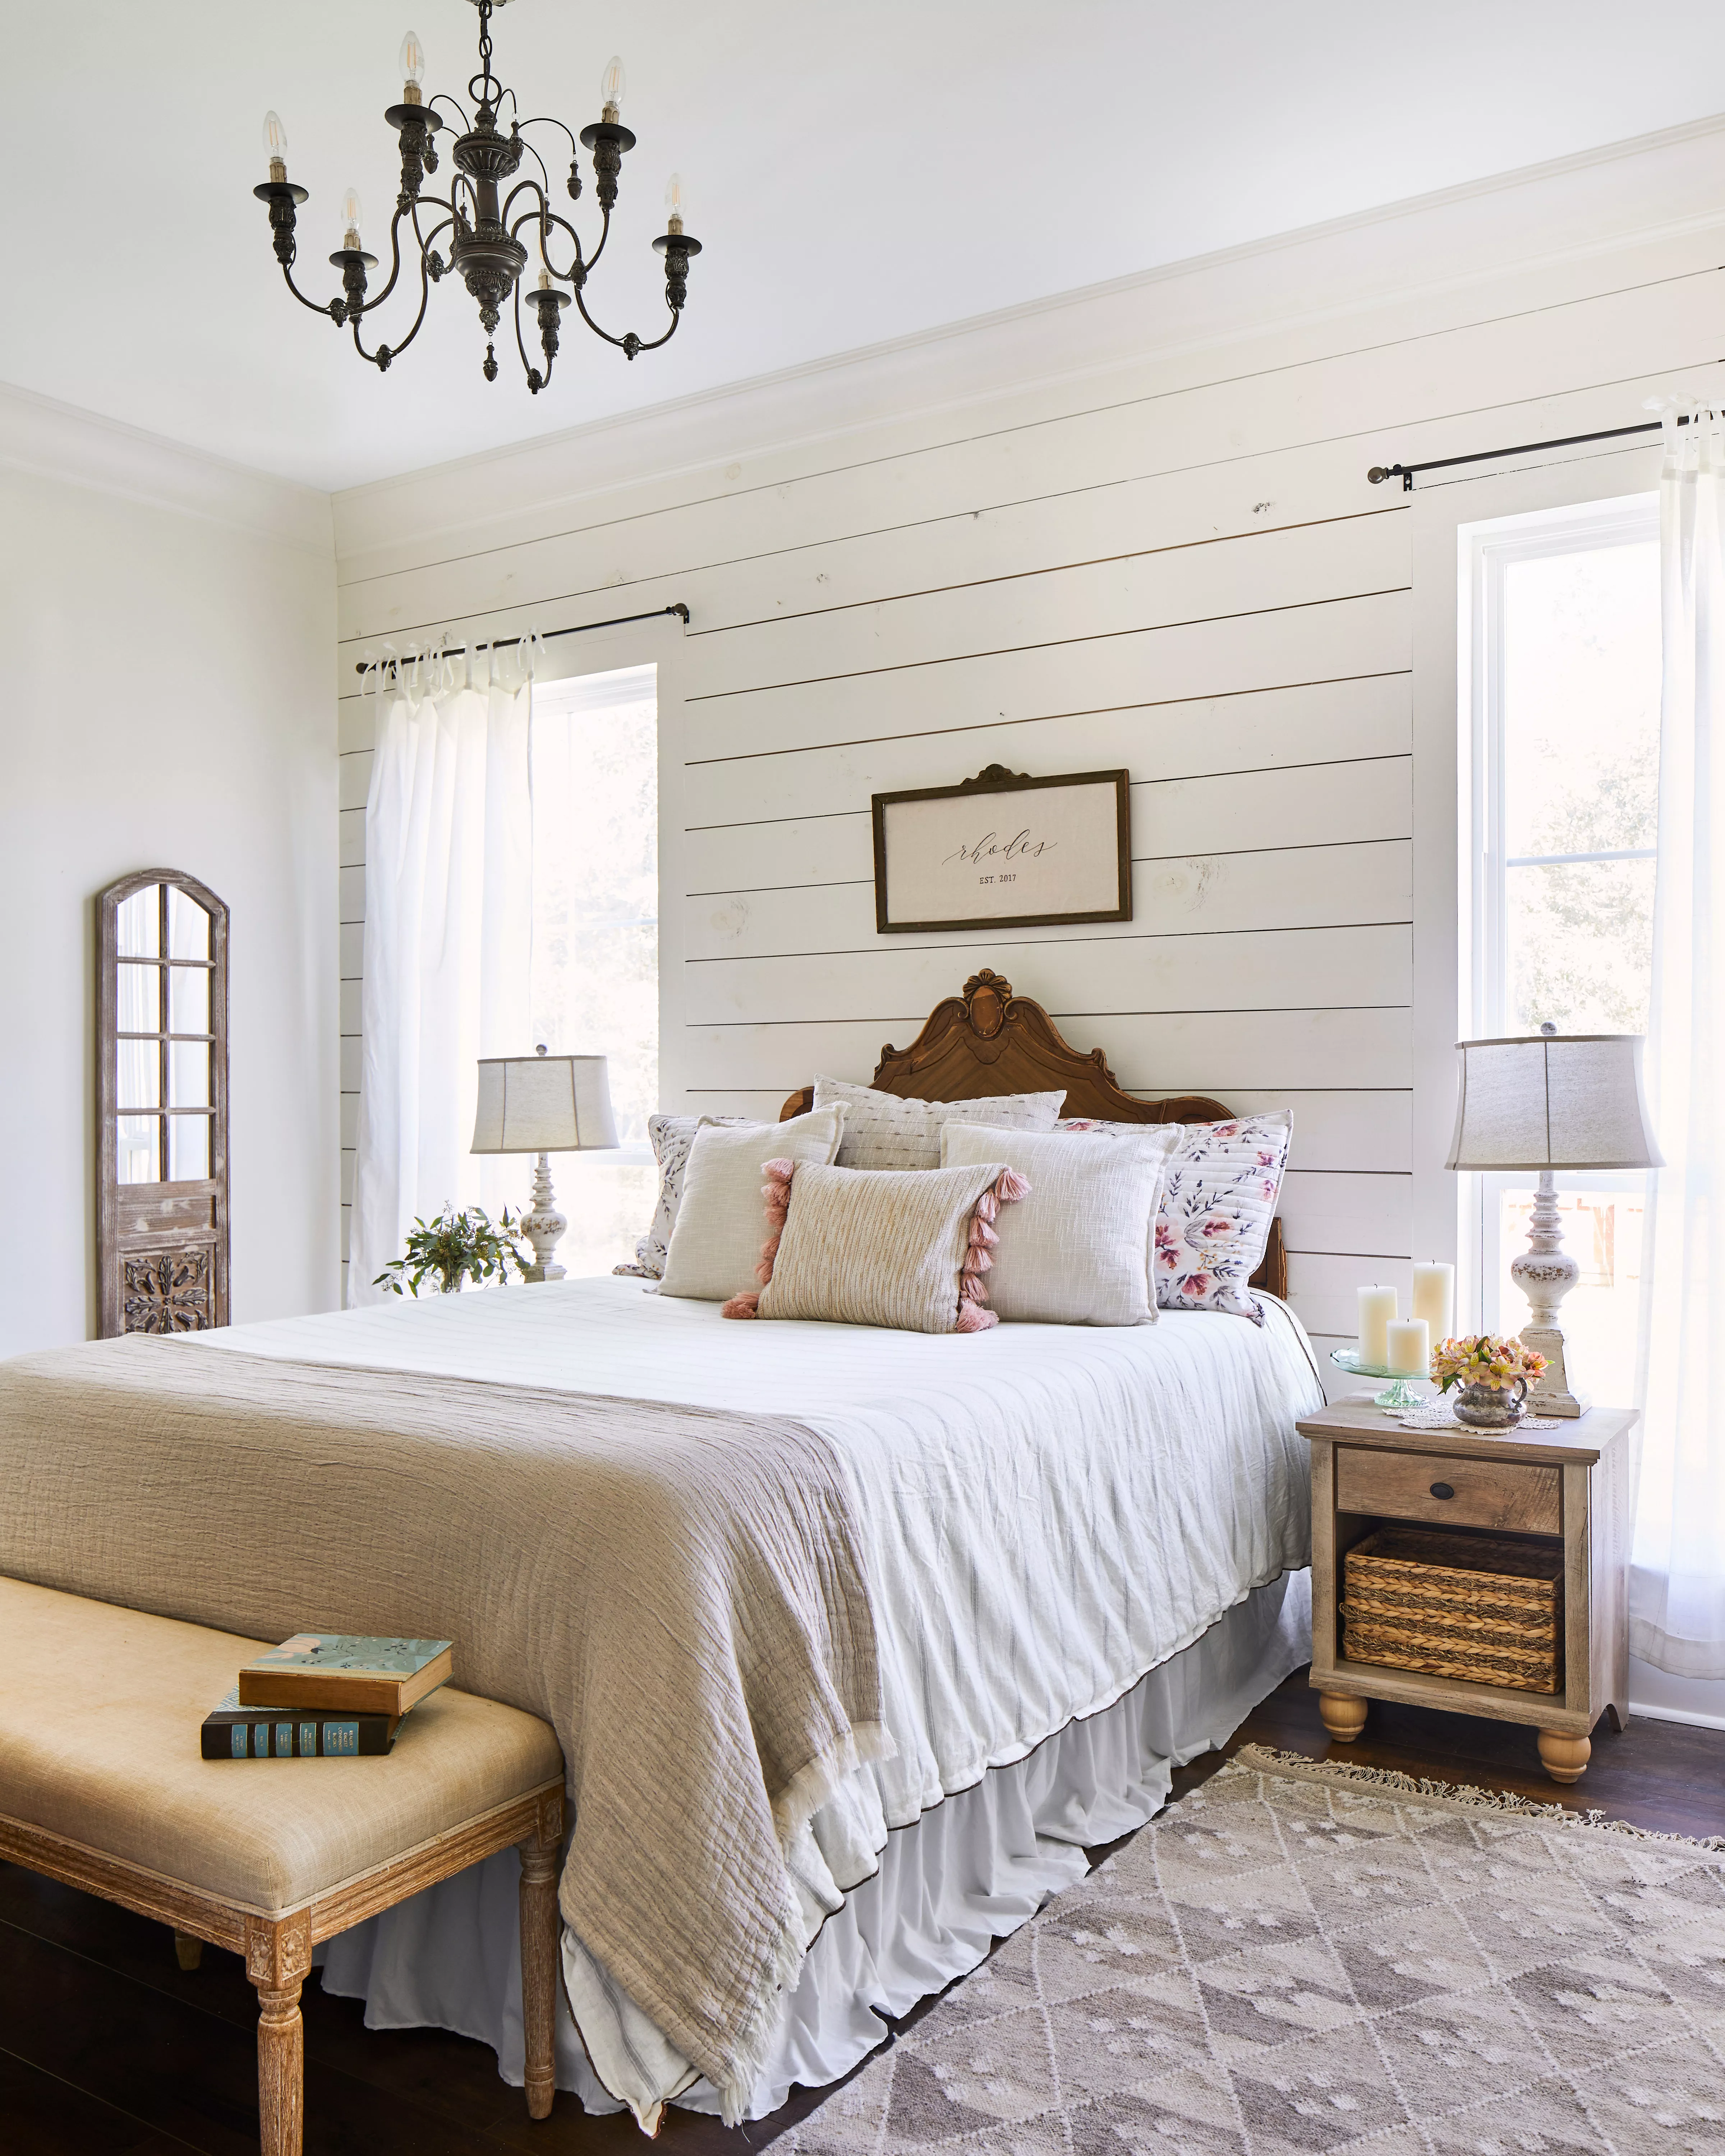 Shiplap bedroom with black chandelier and white bedding